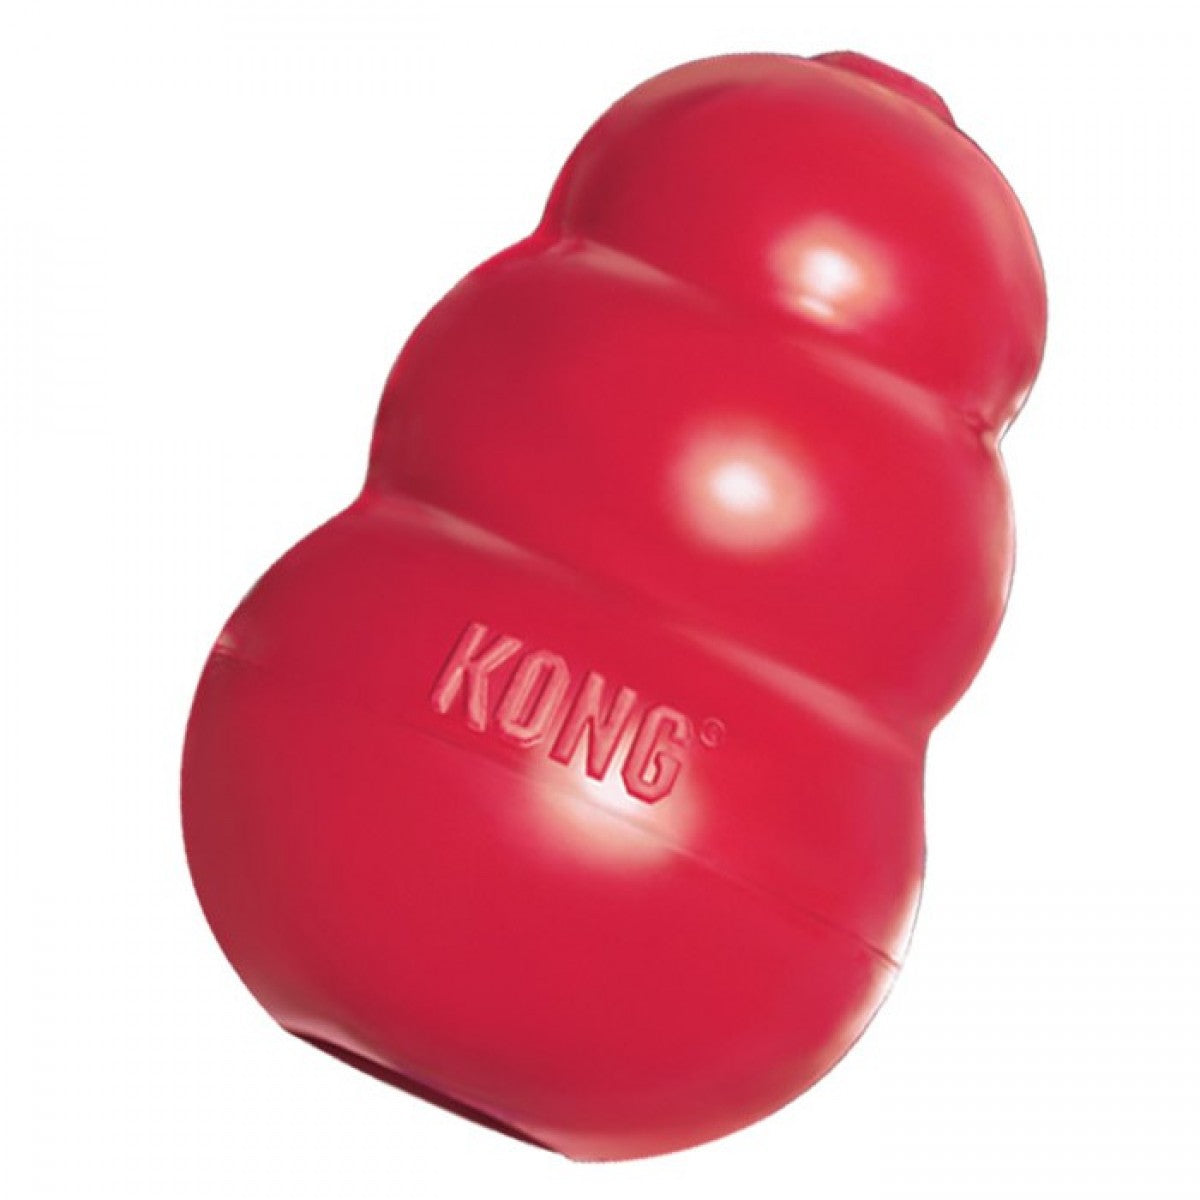 Kong - Classic Chew Toy